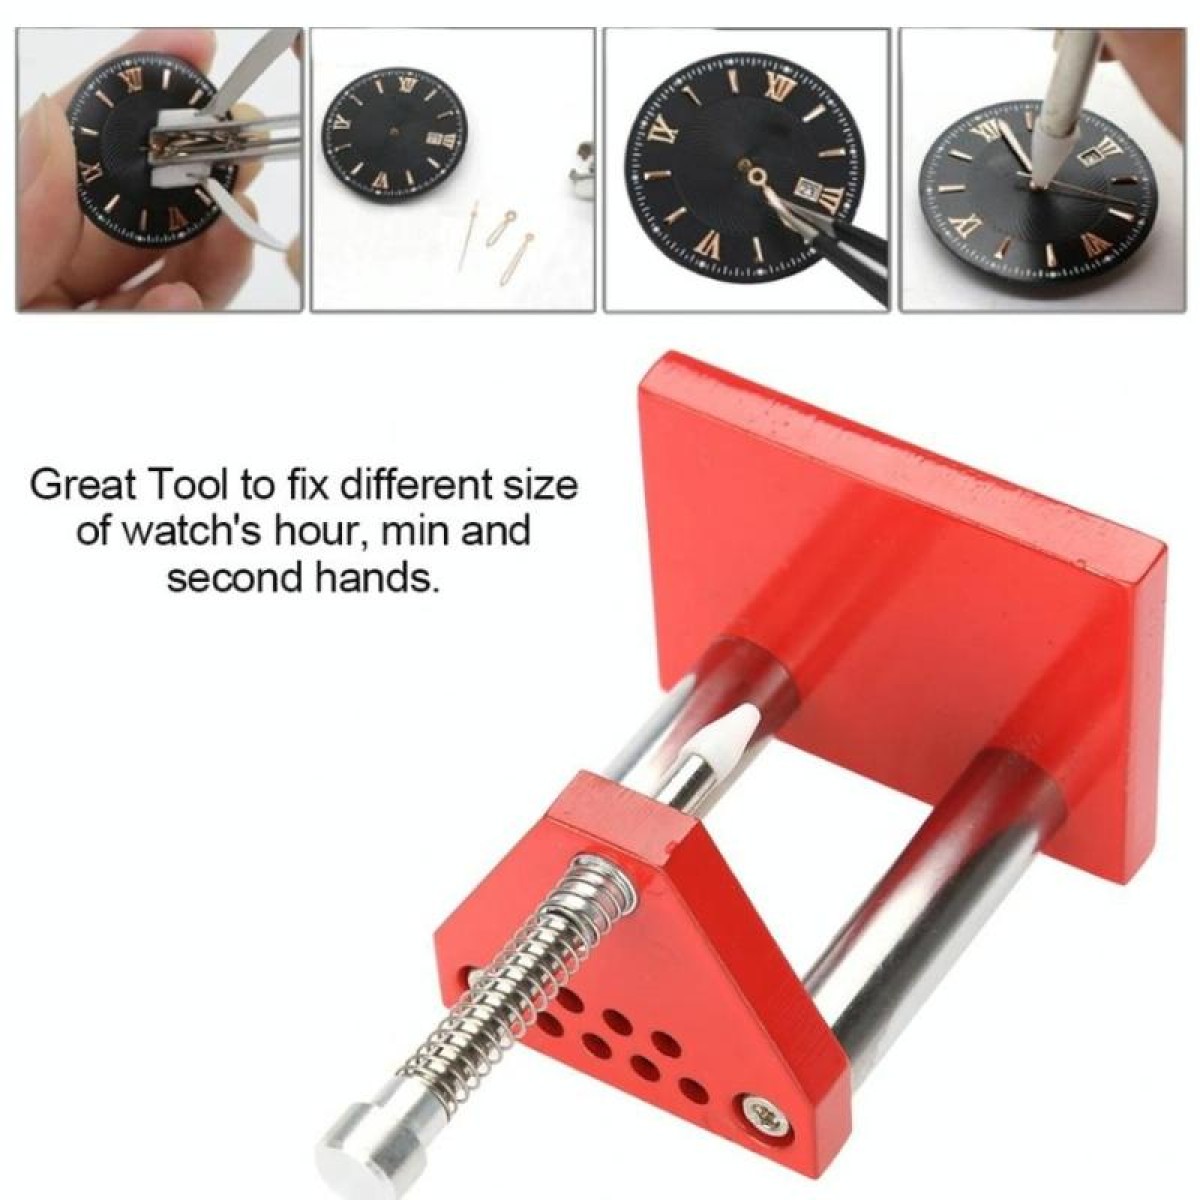 Watch Hand Plunger Puller Remover With 9pcs Plastic Dies Set